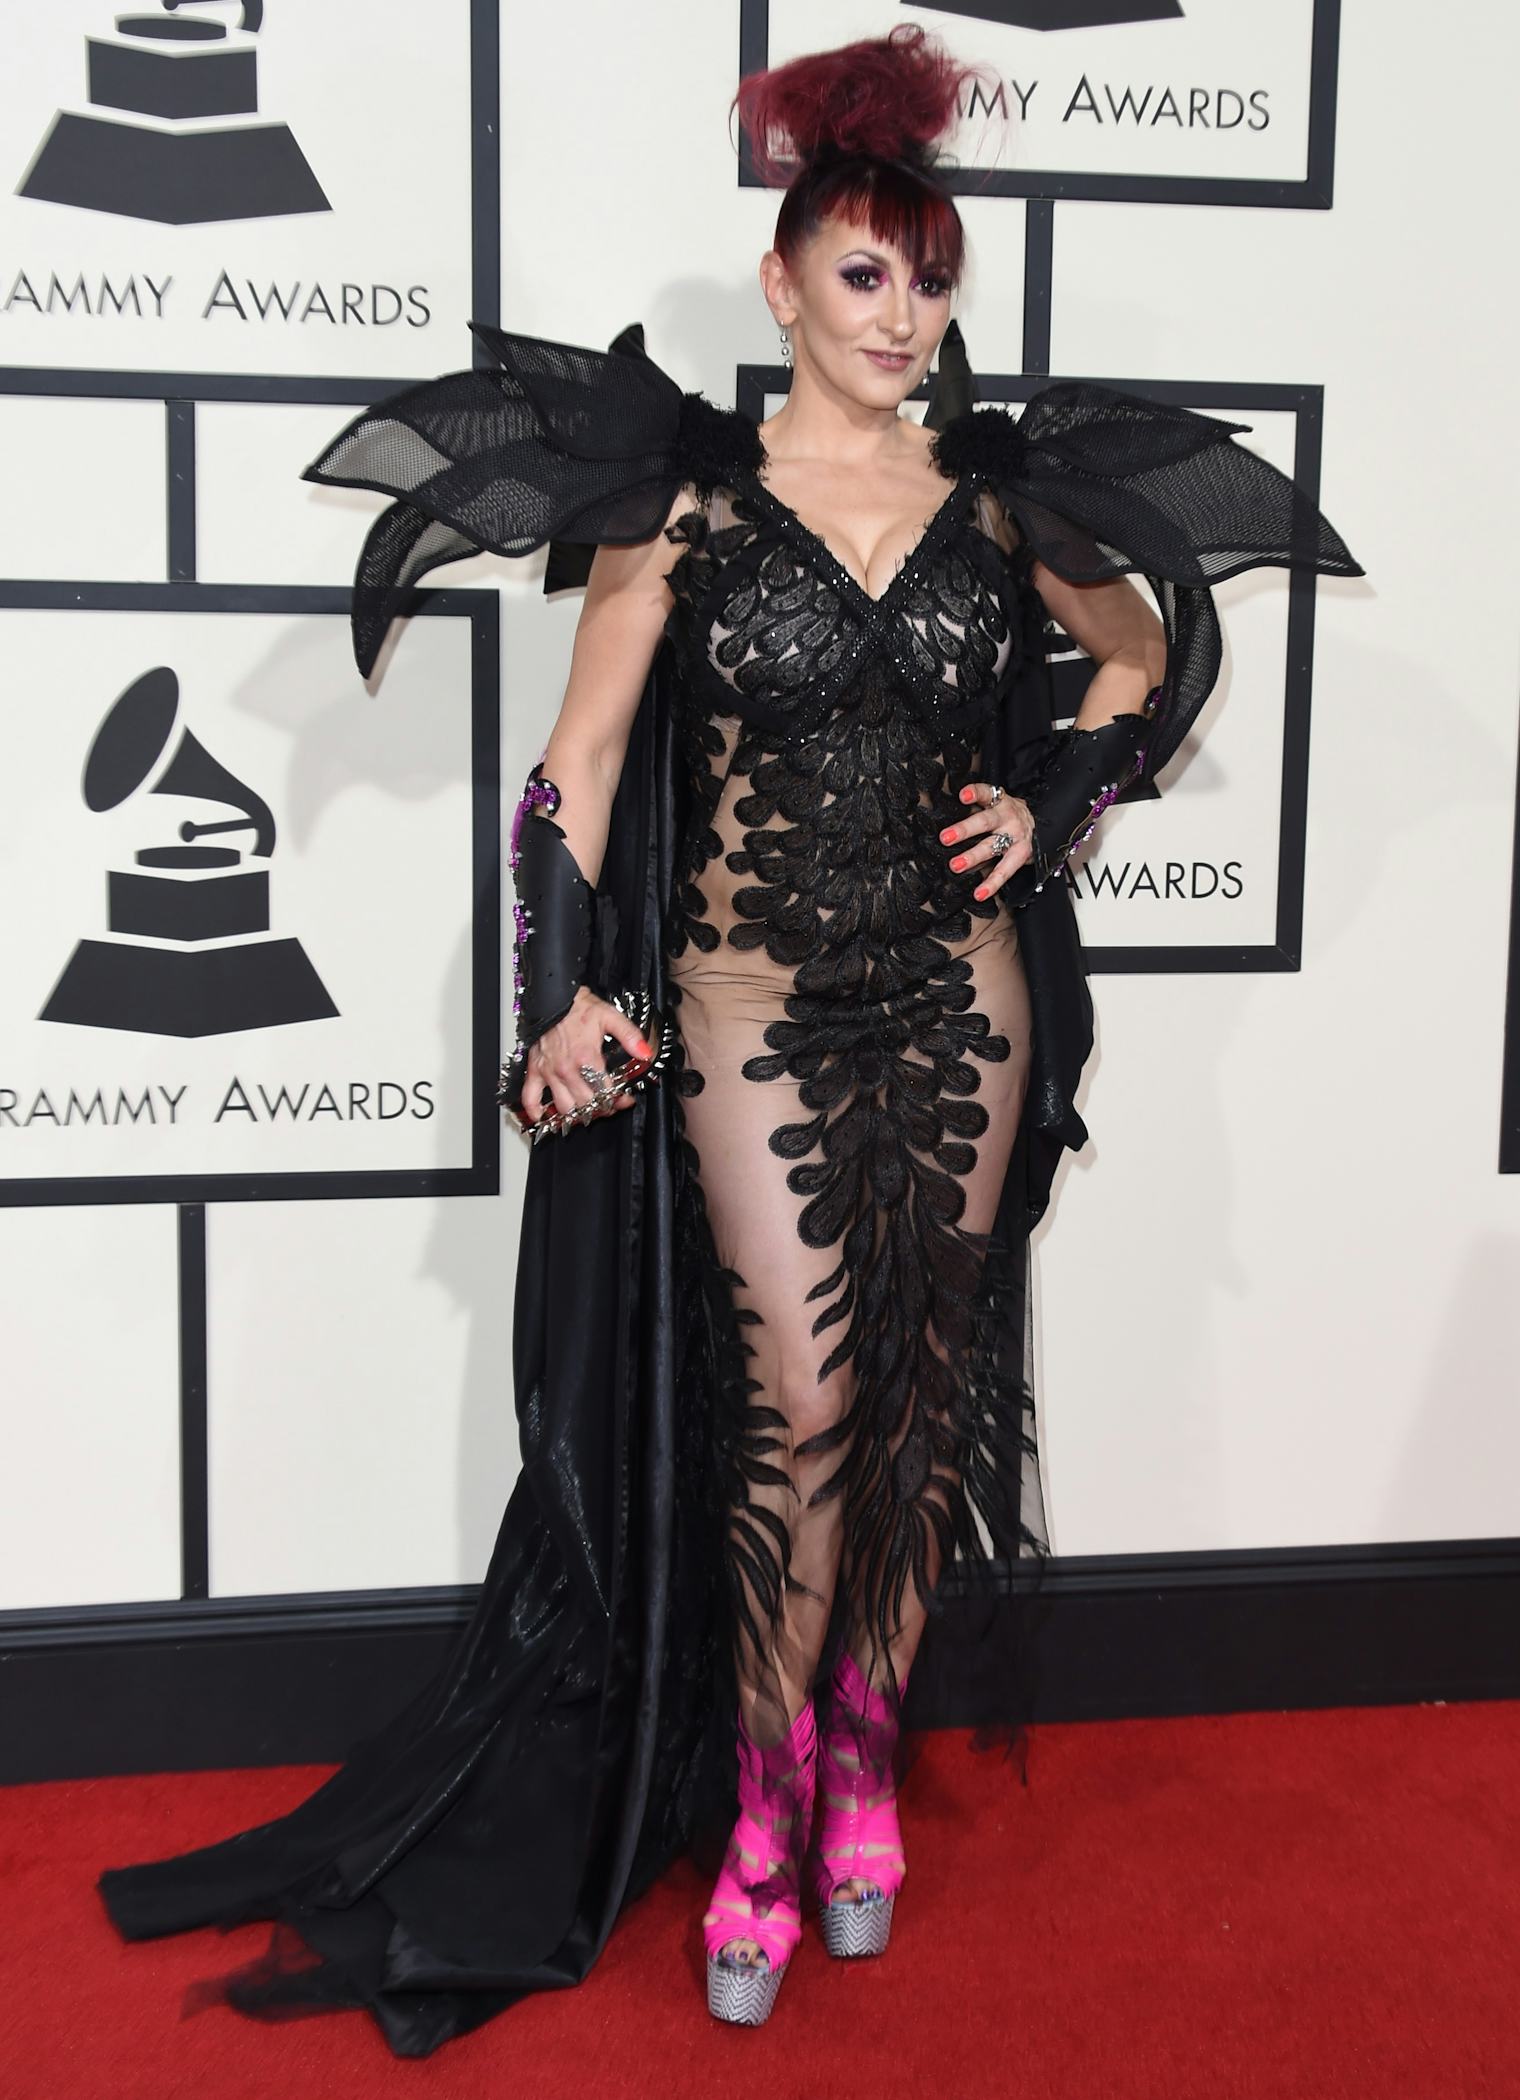 The Craziest Outfits At The 2016 Grammys Were Totally Fun